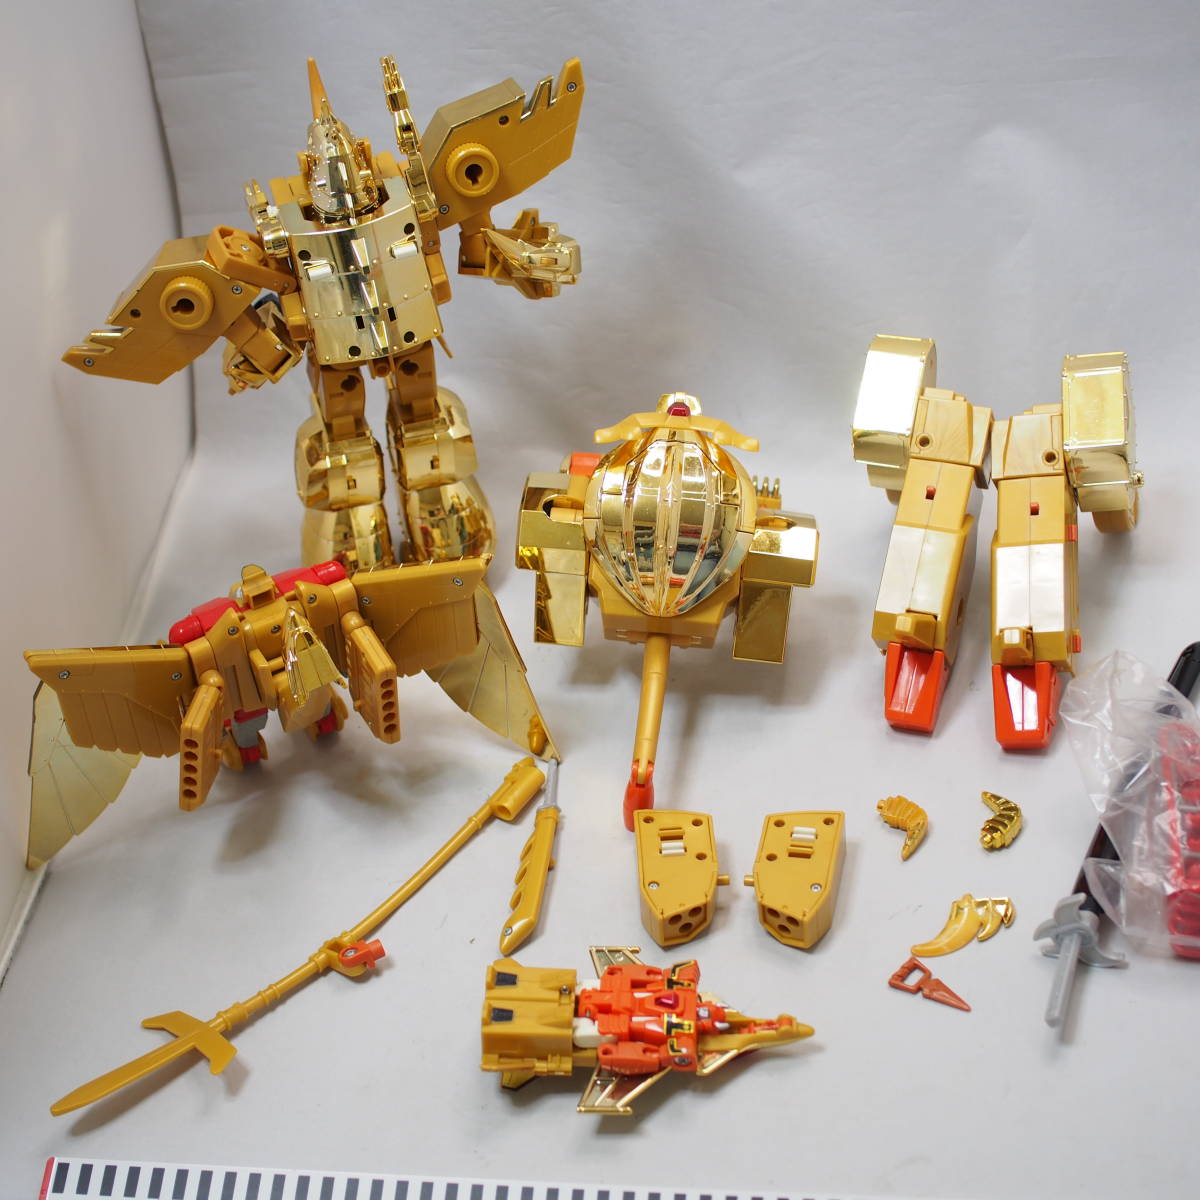  that time thing Brave of Gold Goldran DX yellow gold ninja empty . Leon Kaiser present condition goods Bandai Takara retro The Brave of Gold Goldran control 303-16